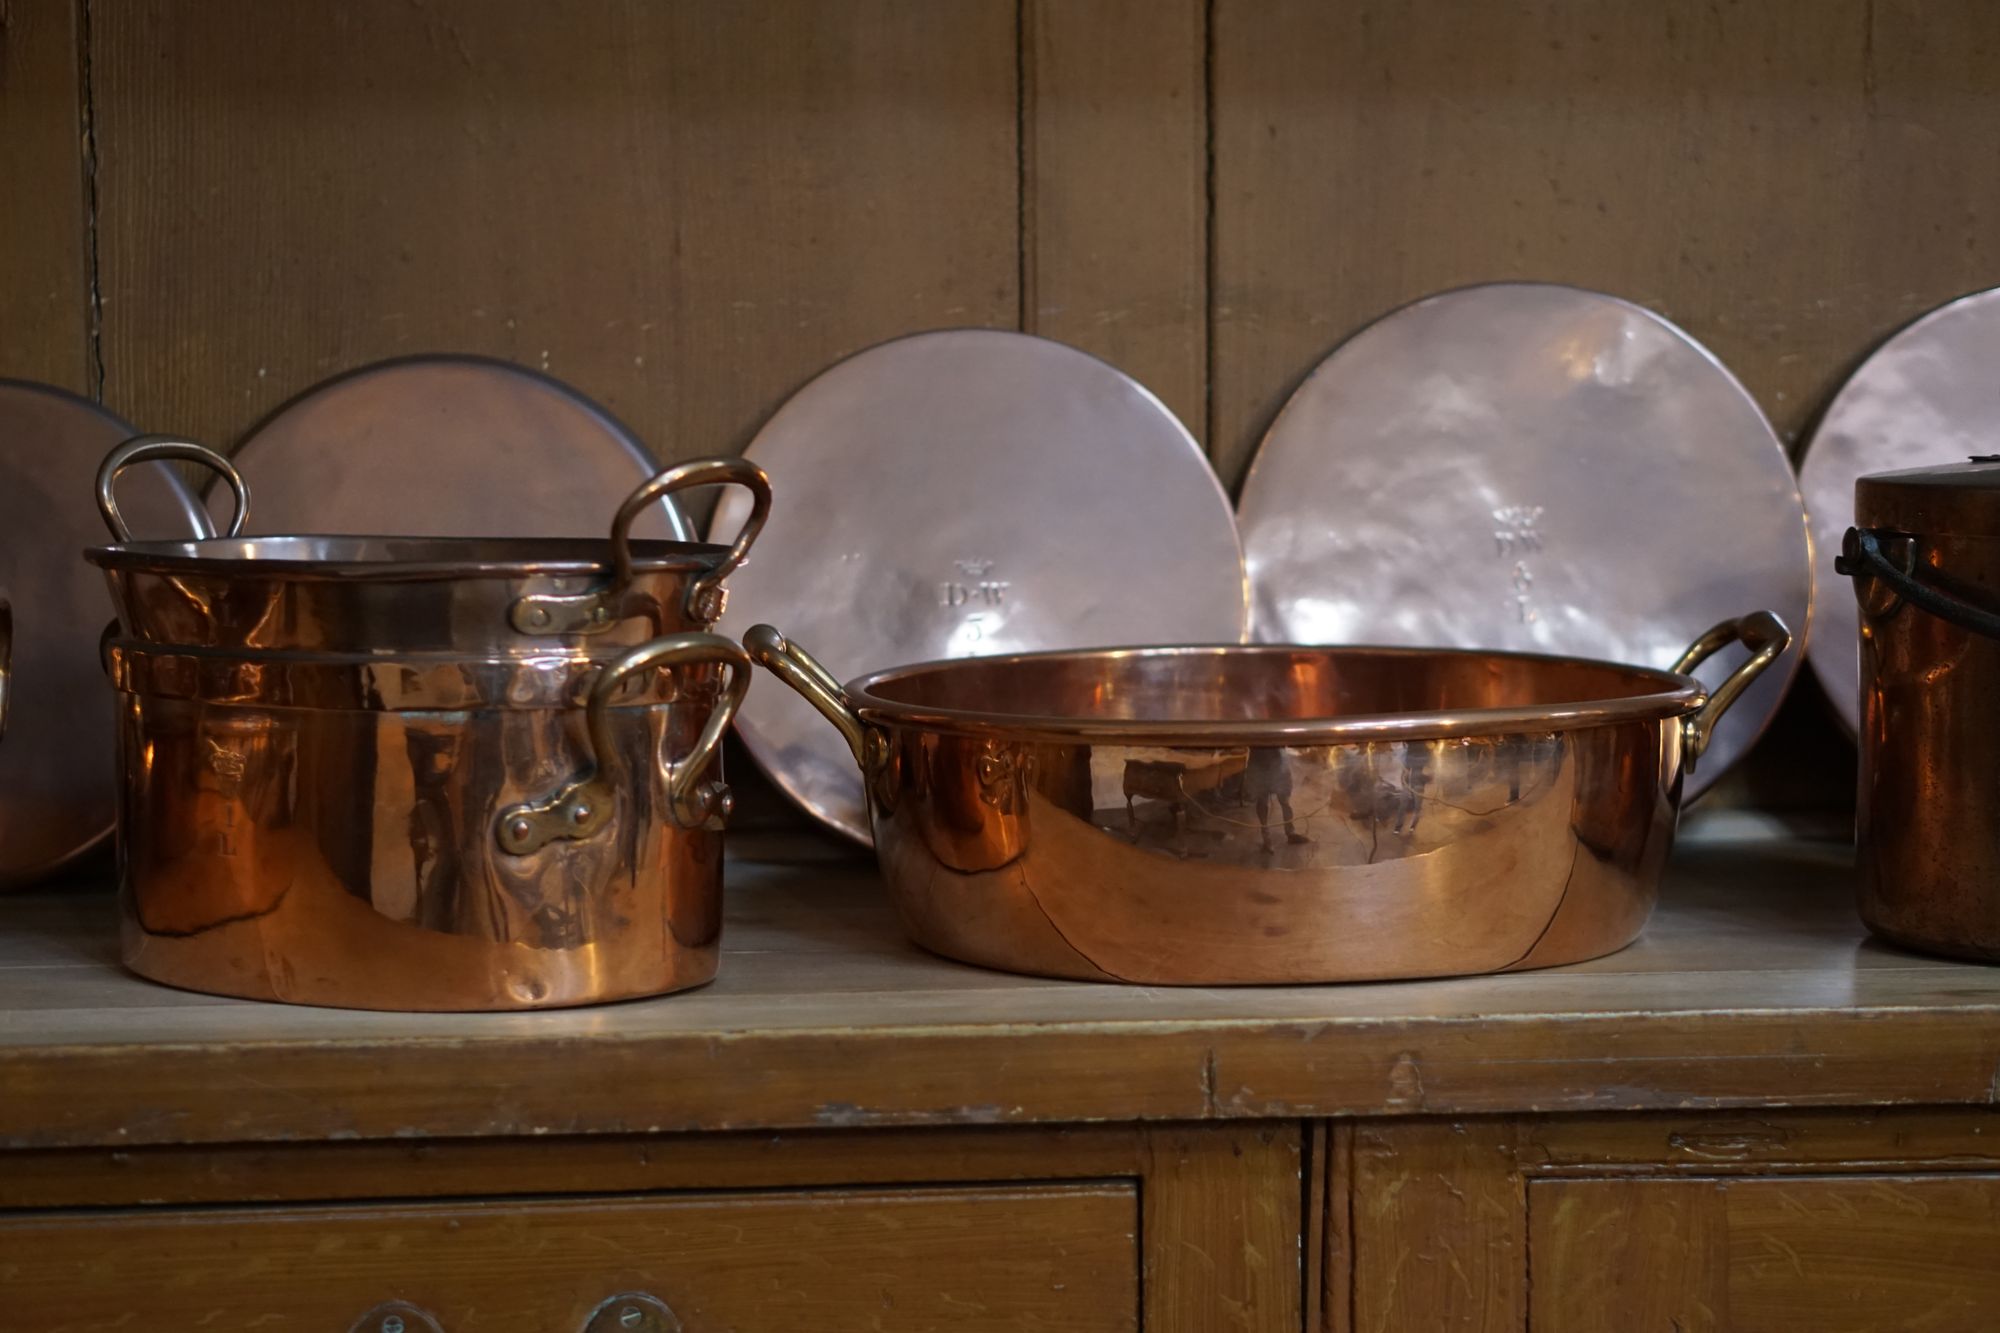 Copper pots and pans and silver platters on an old wooden sideboard.